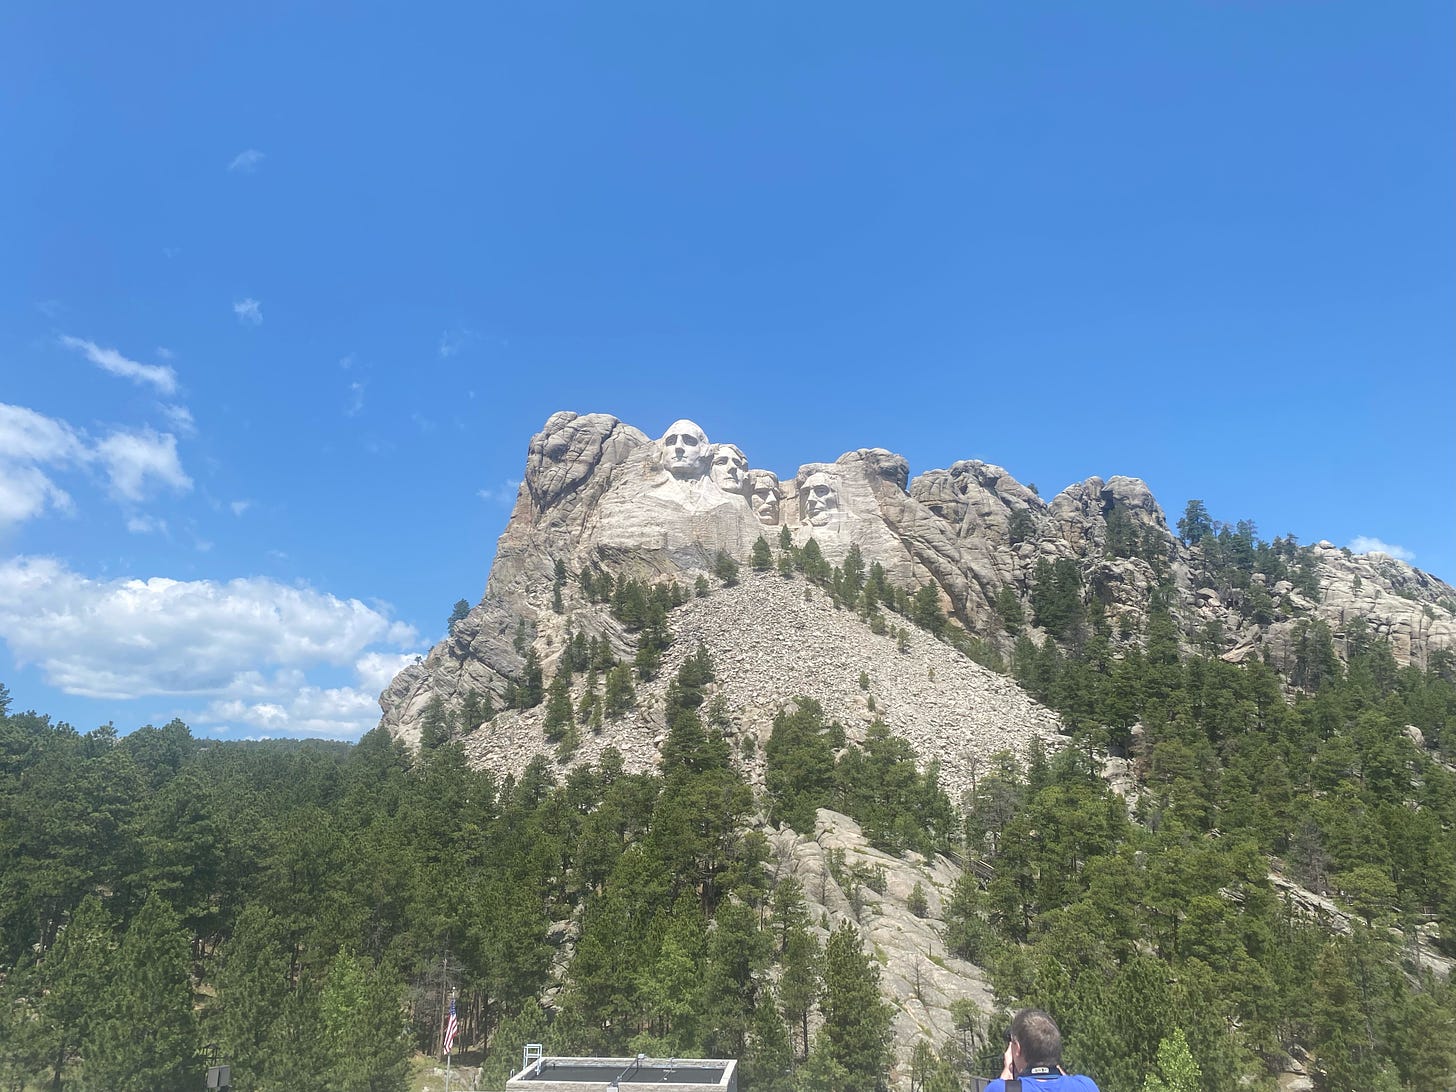 Appeals court rules against woman injured at Mount Rushmore